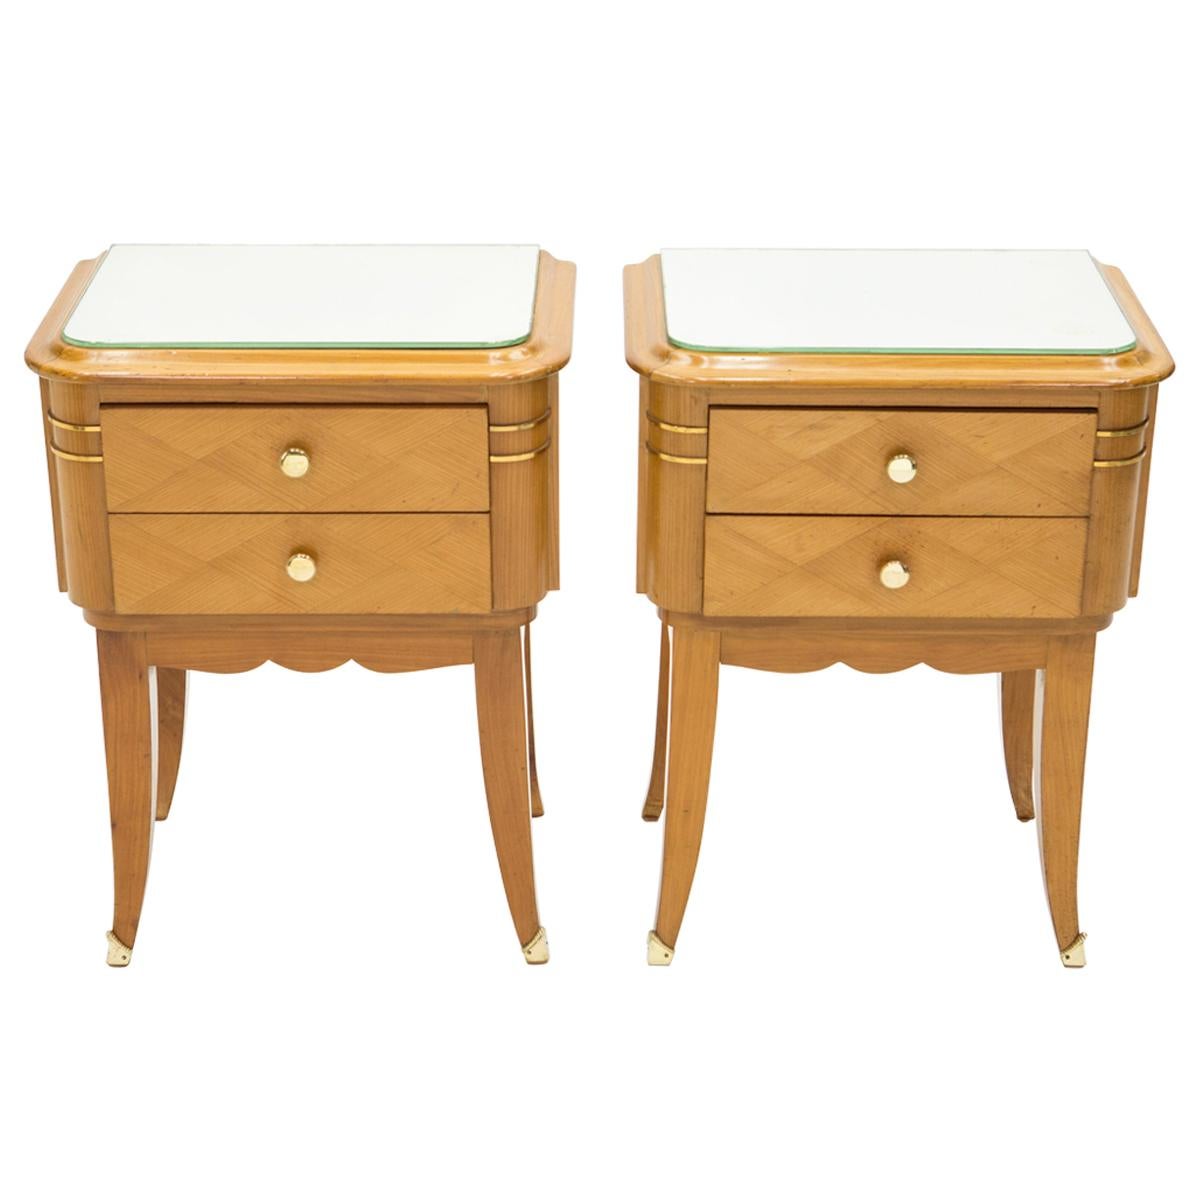 French Sycamore Brass Nightstands 2 Drawers by Jean Pascaud, 1940s For Sale